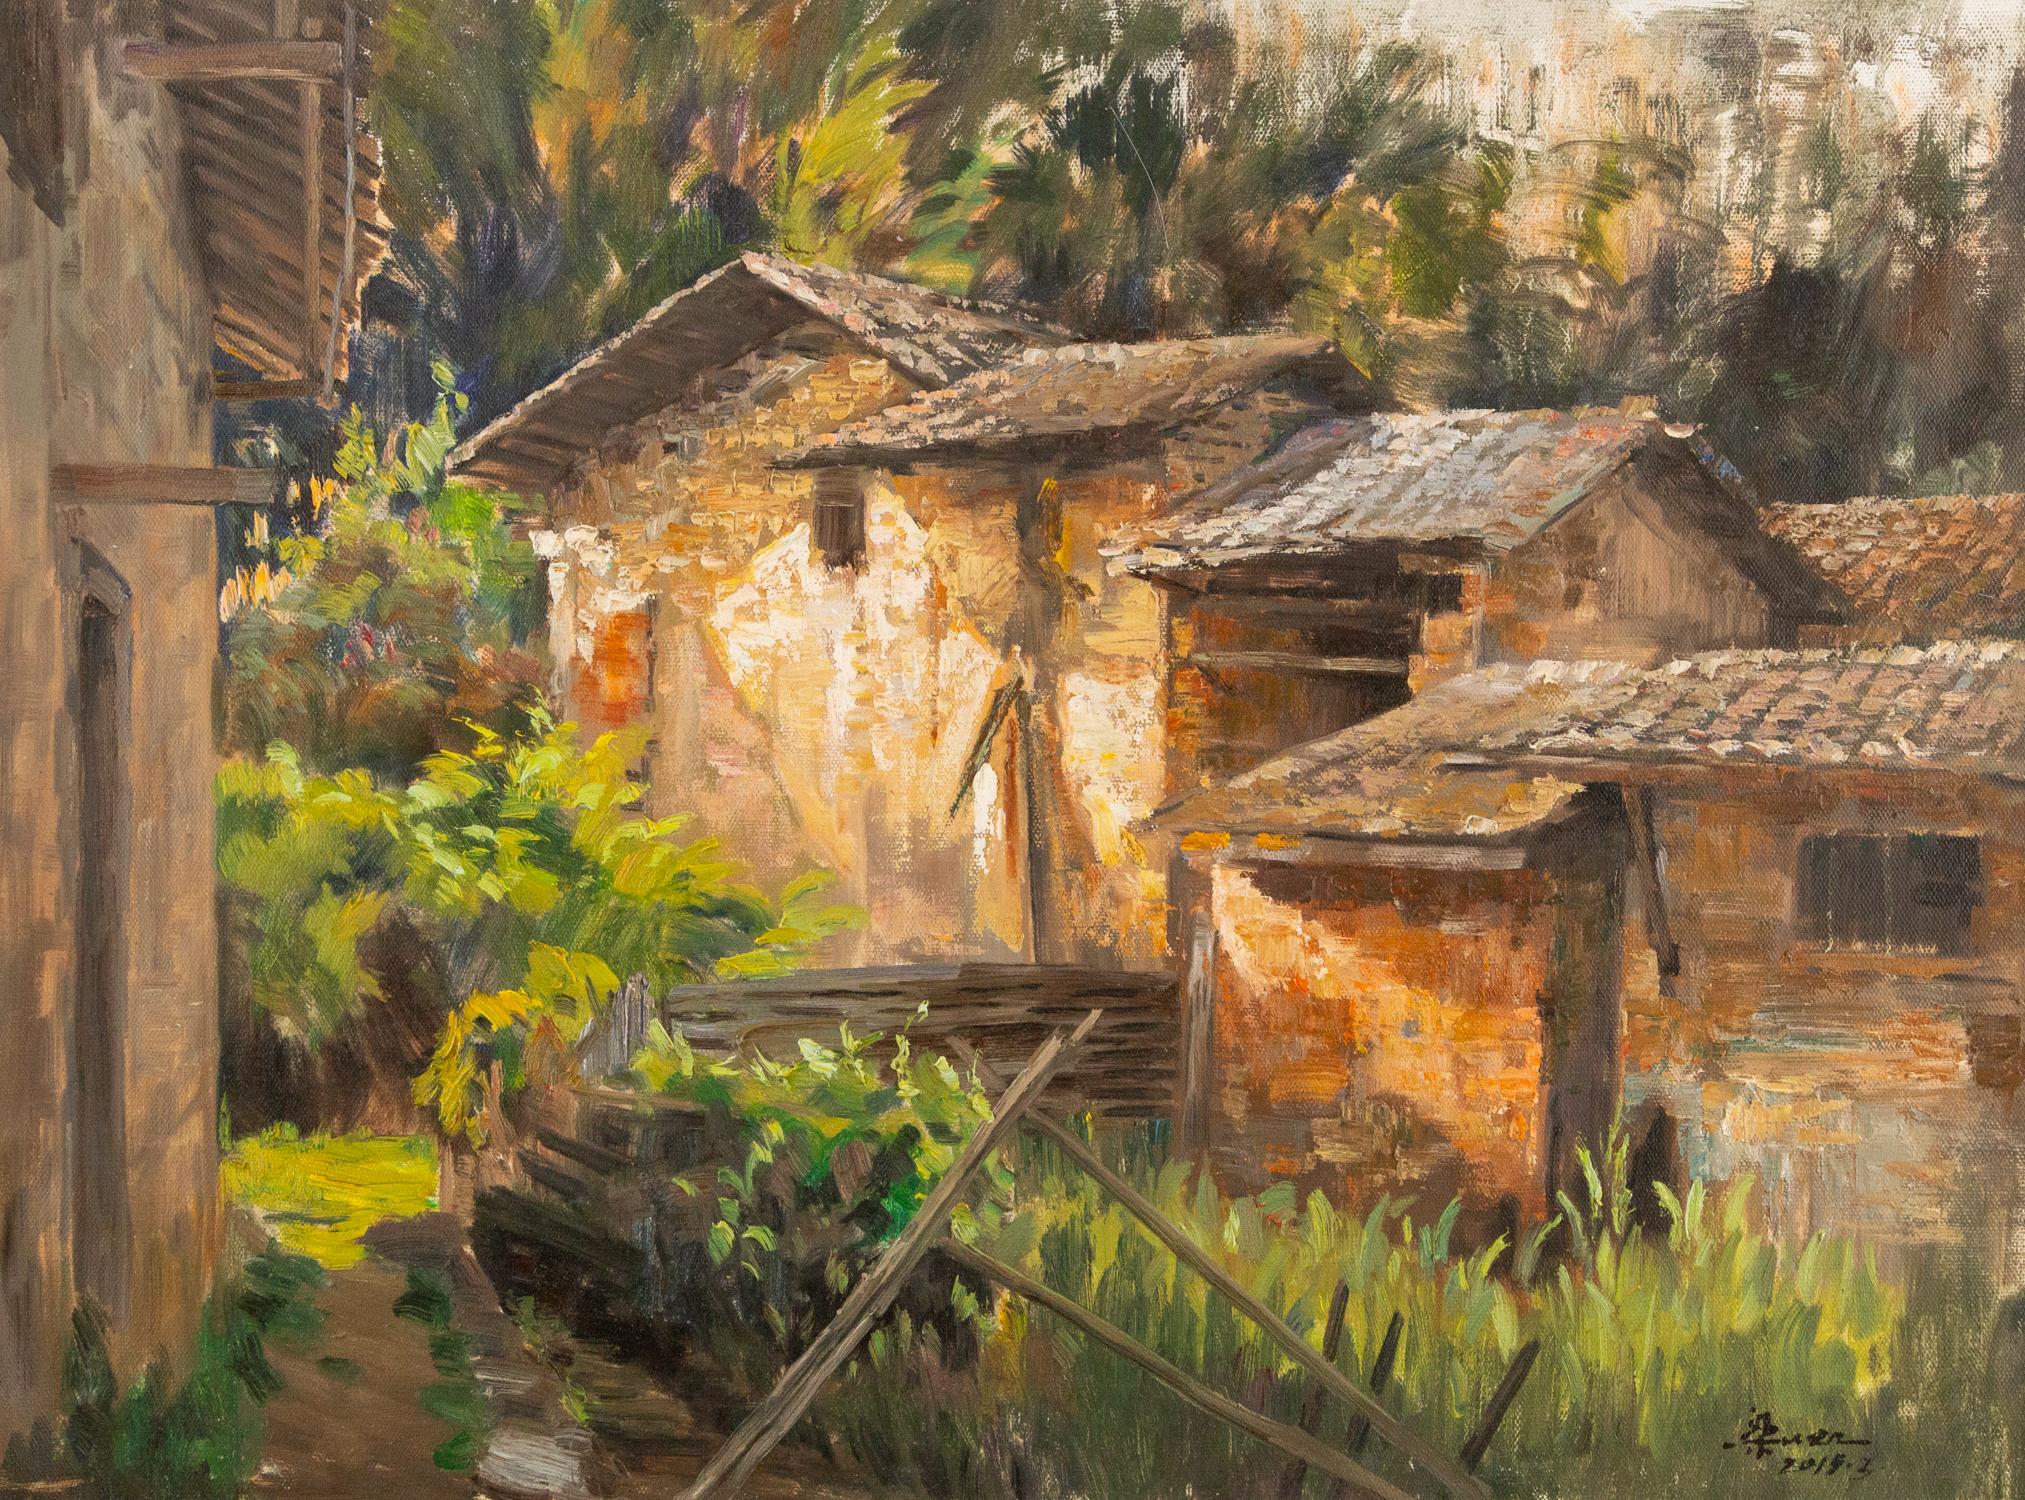 Title: Farmyard
Medium: Oil on canvas
Size: 23.5 x 31.25 inches
Frame: Framing options available!
Condition: The painting appears to be in excellent condition.
Note: This painting is unstretched
Year: 2015
Artist: Liang Guiwen
Signature: